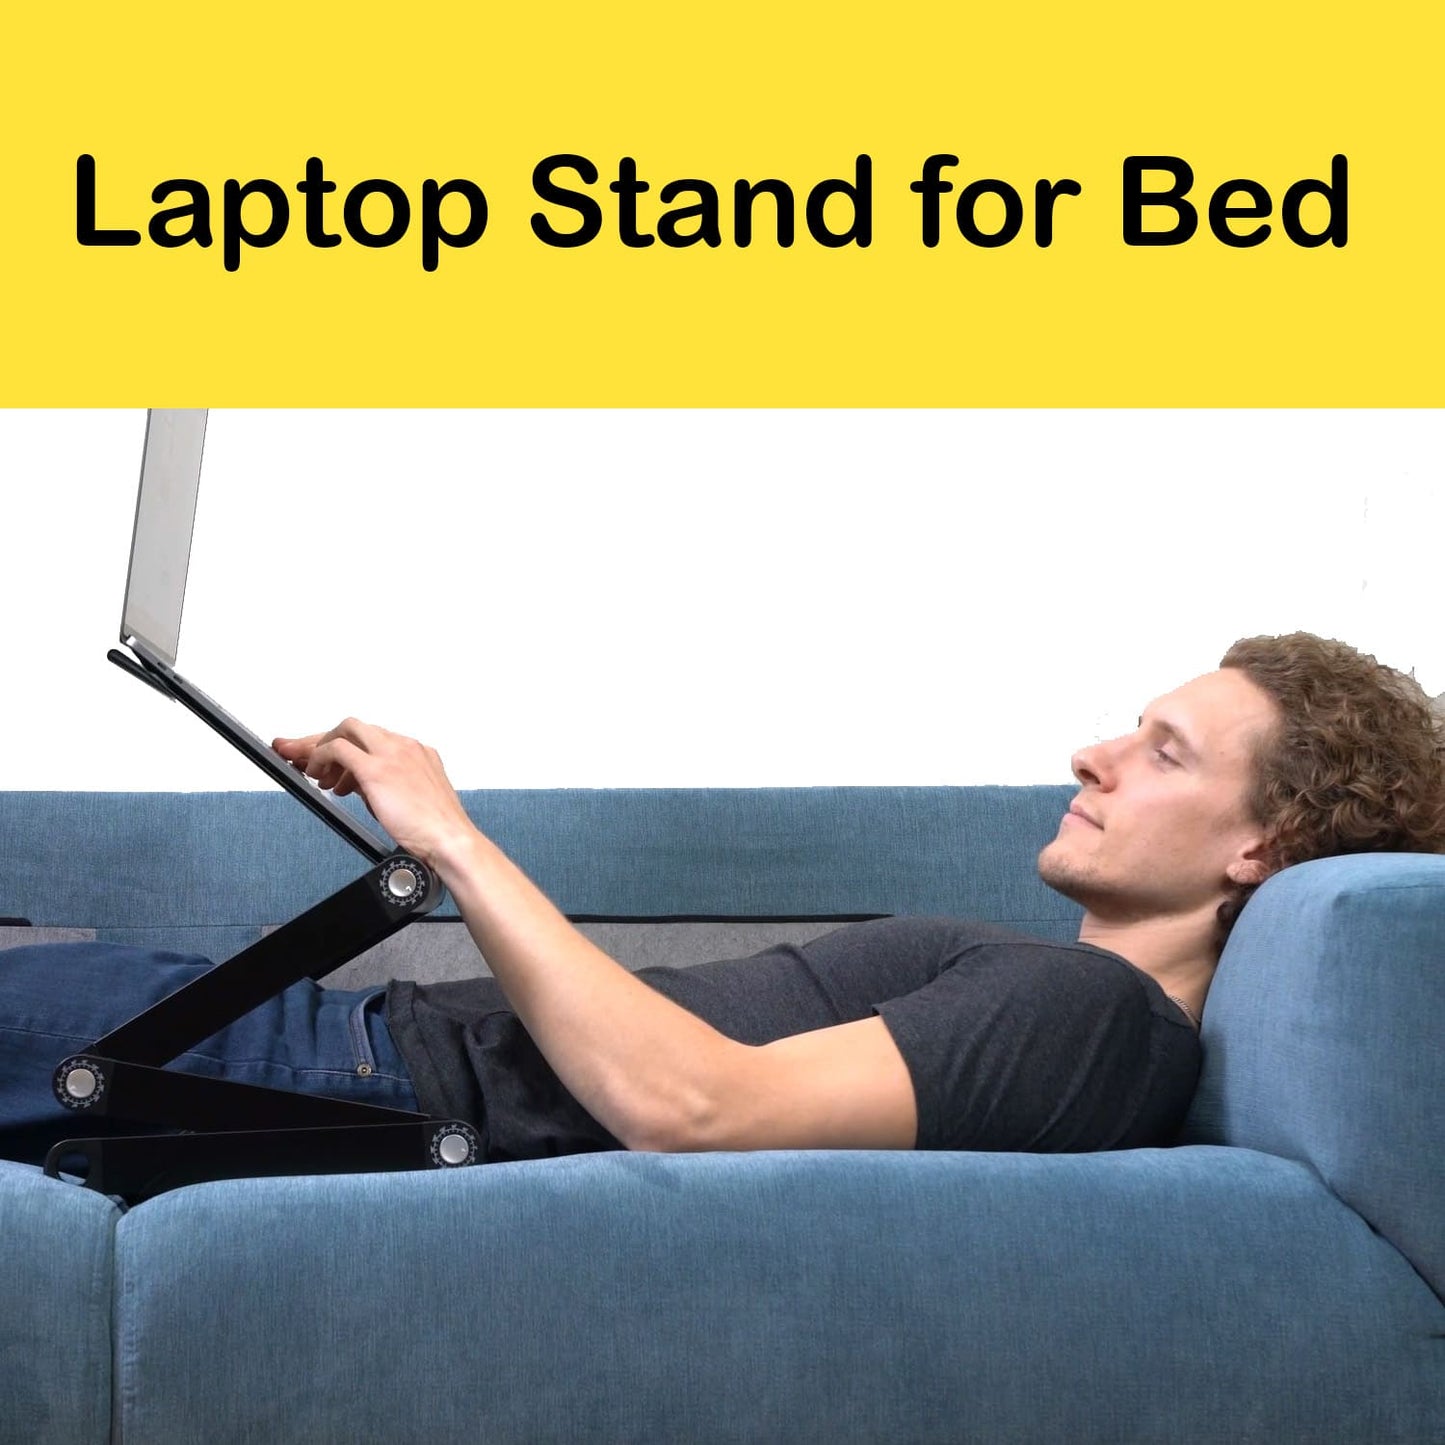 Laptop Stand, Laptop Stand for Bed, Adjustable Laptop Stand, Folding Laptop Stand, Cooling Tray, WonderWorker Nobel, 2